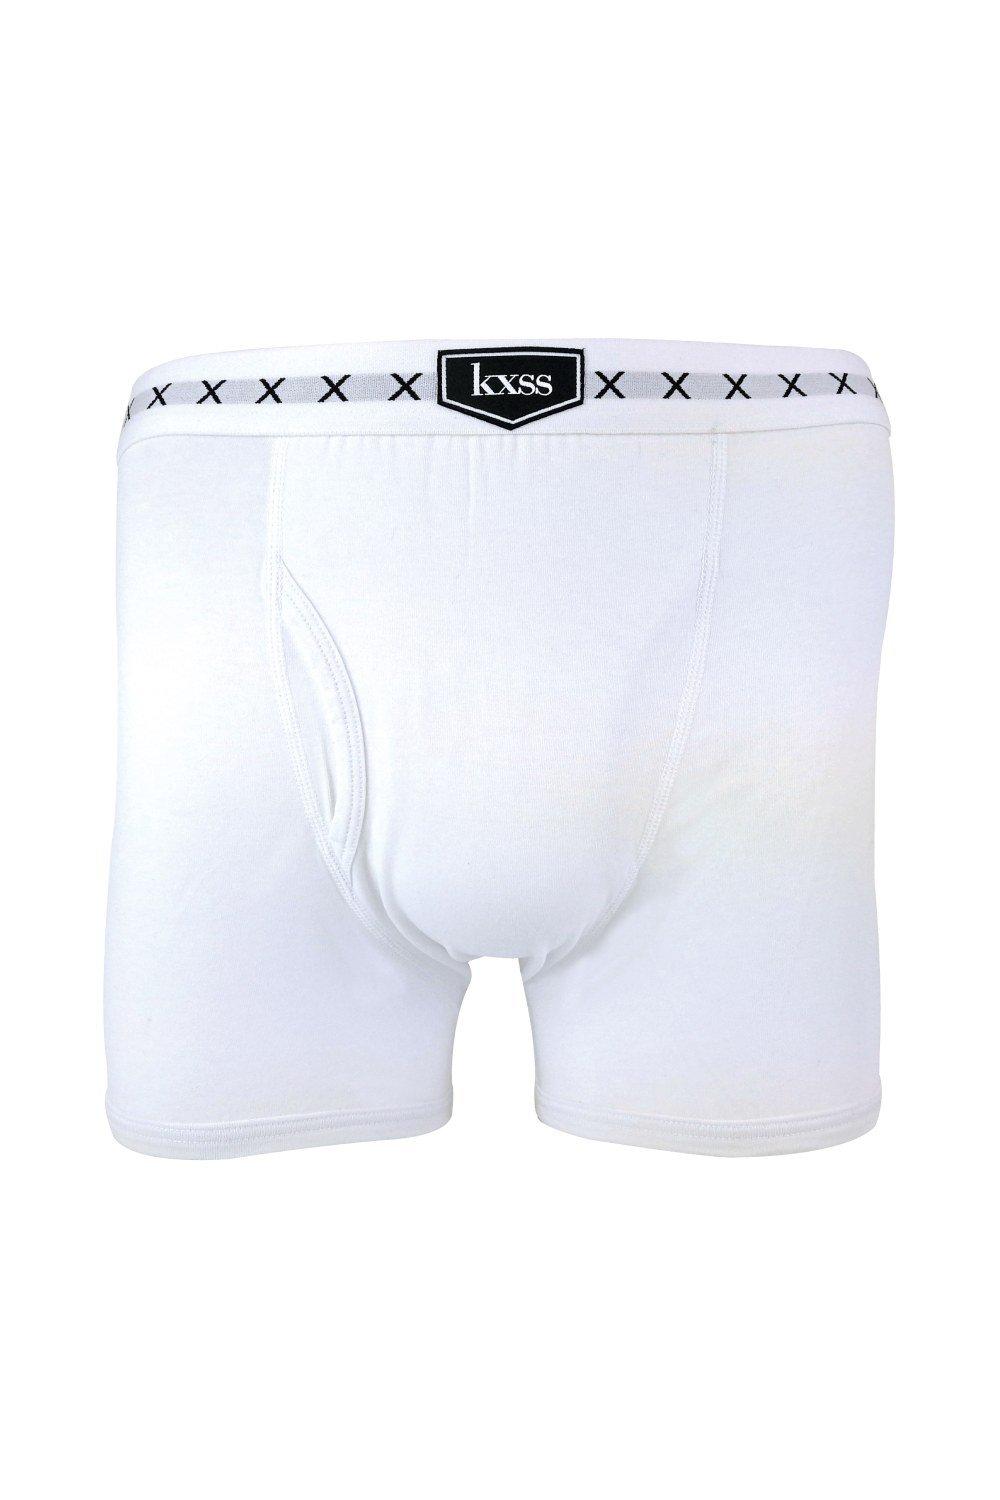 100% Cotton Comfy Breathable Trunks